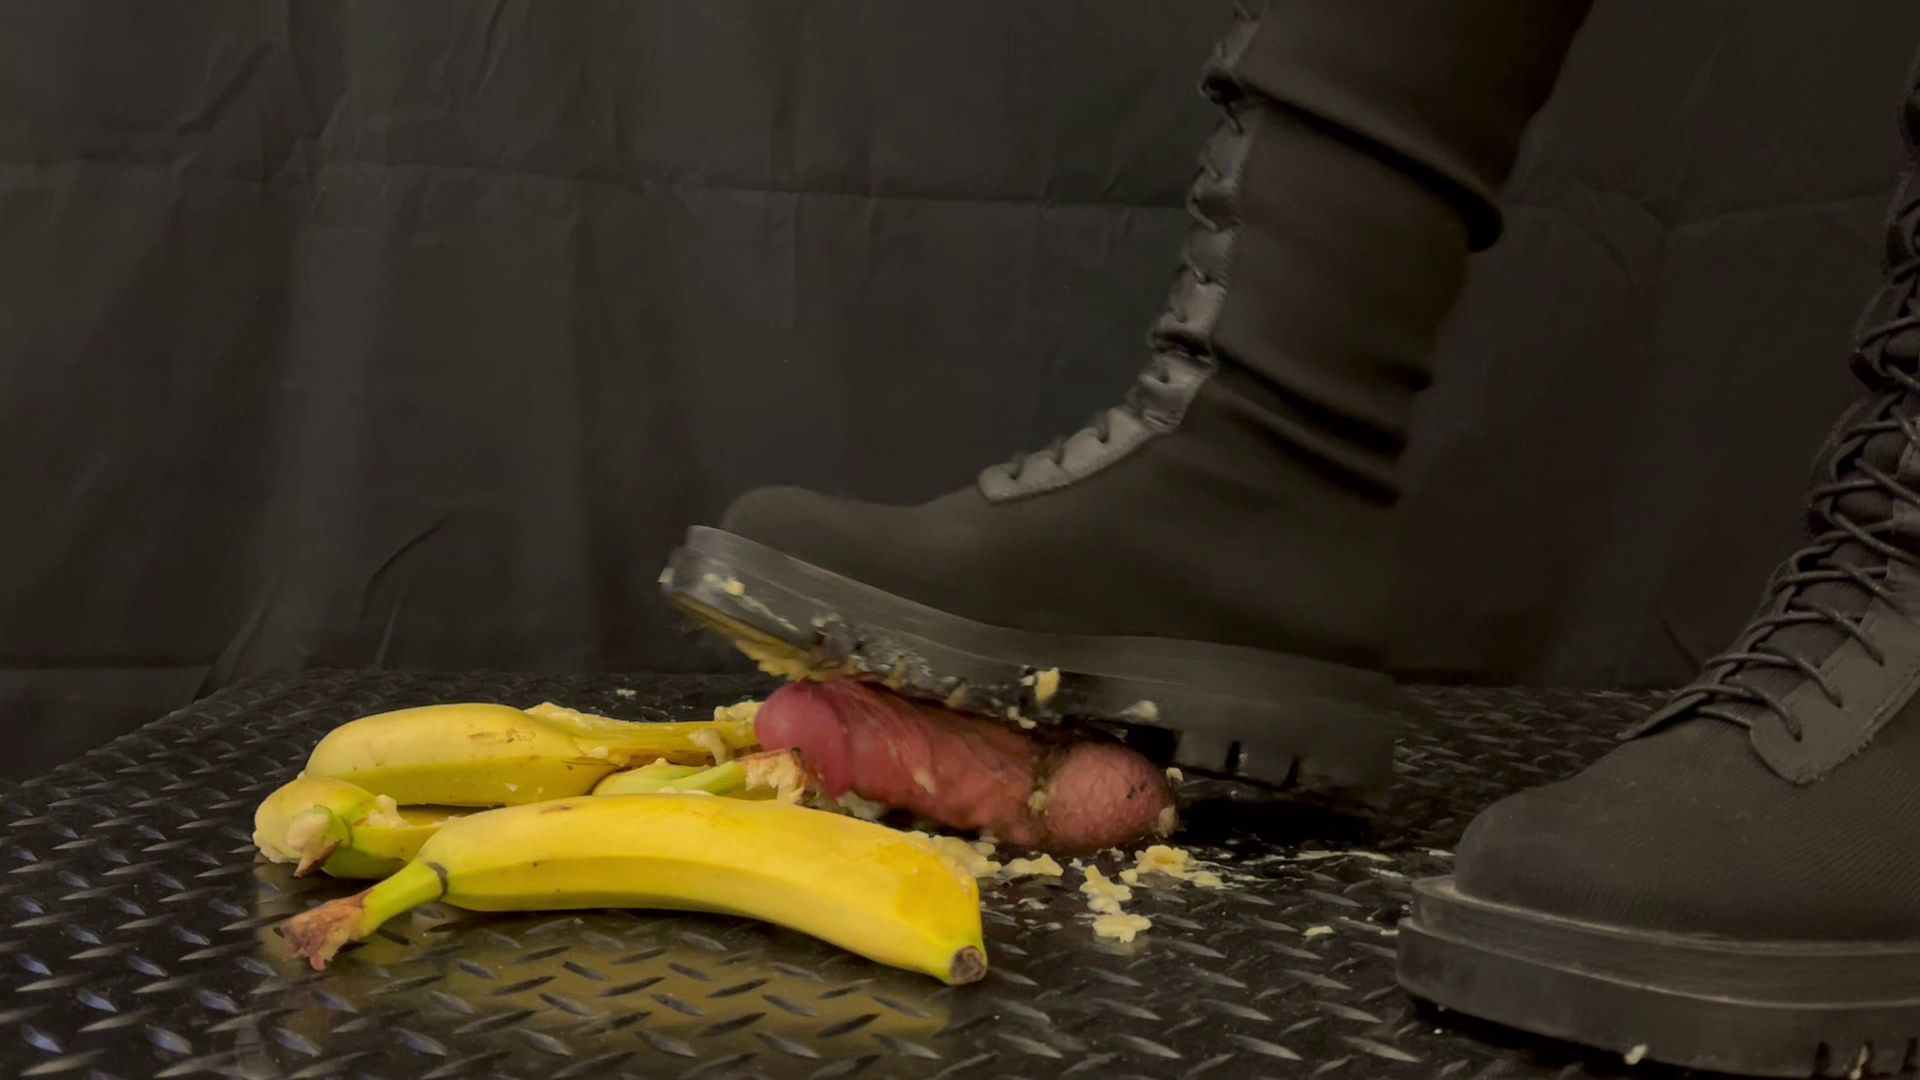 Combat Boots & More CBT, Ballbusting, Cock Trample Crush #20